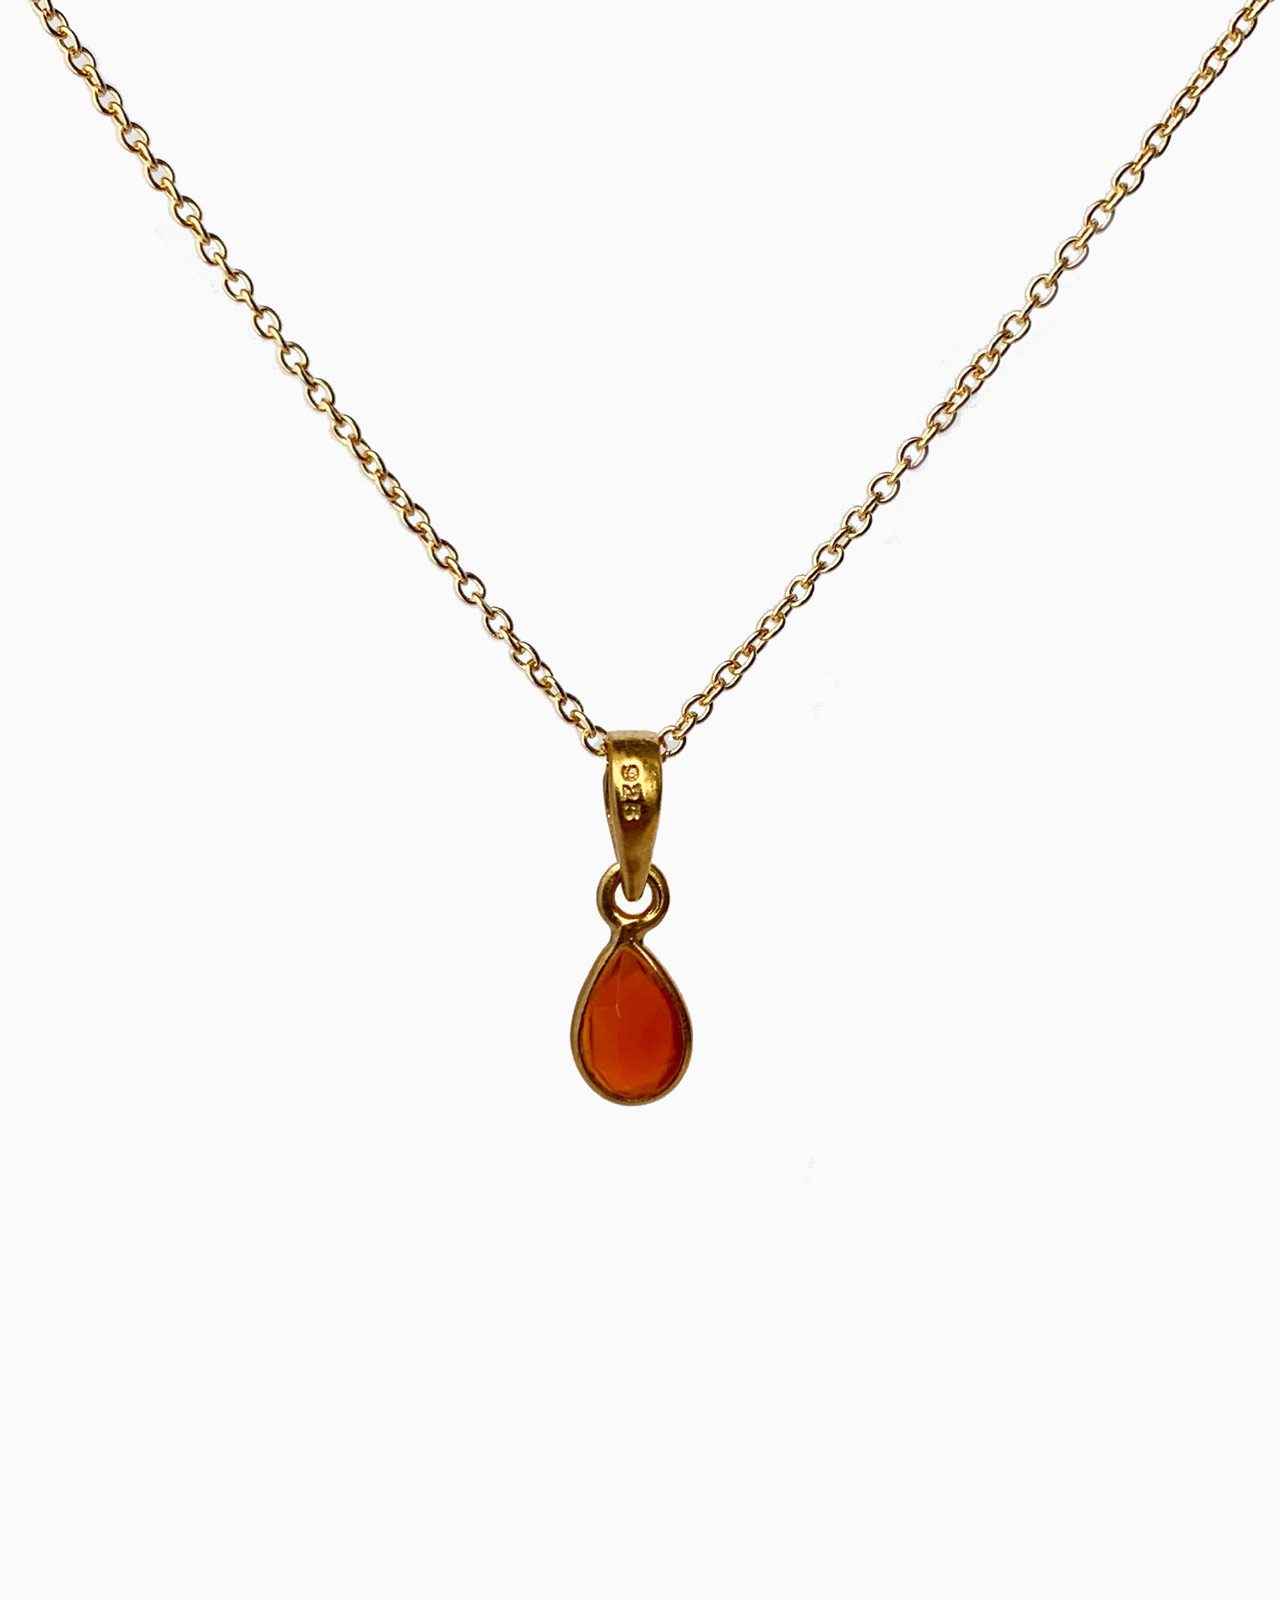 Gold Filled Wrapped Carnelian Heart Pendant Carnelian Heart CenterpieceCarnelian Heart PendantWire-Wrapped Carnelian Centerpiece14Kt